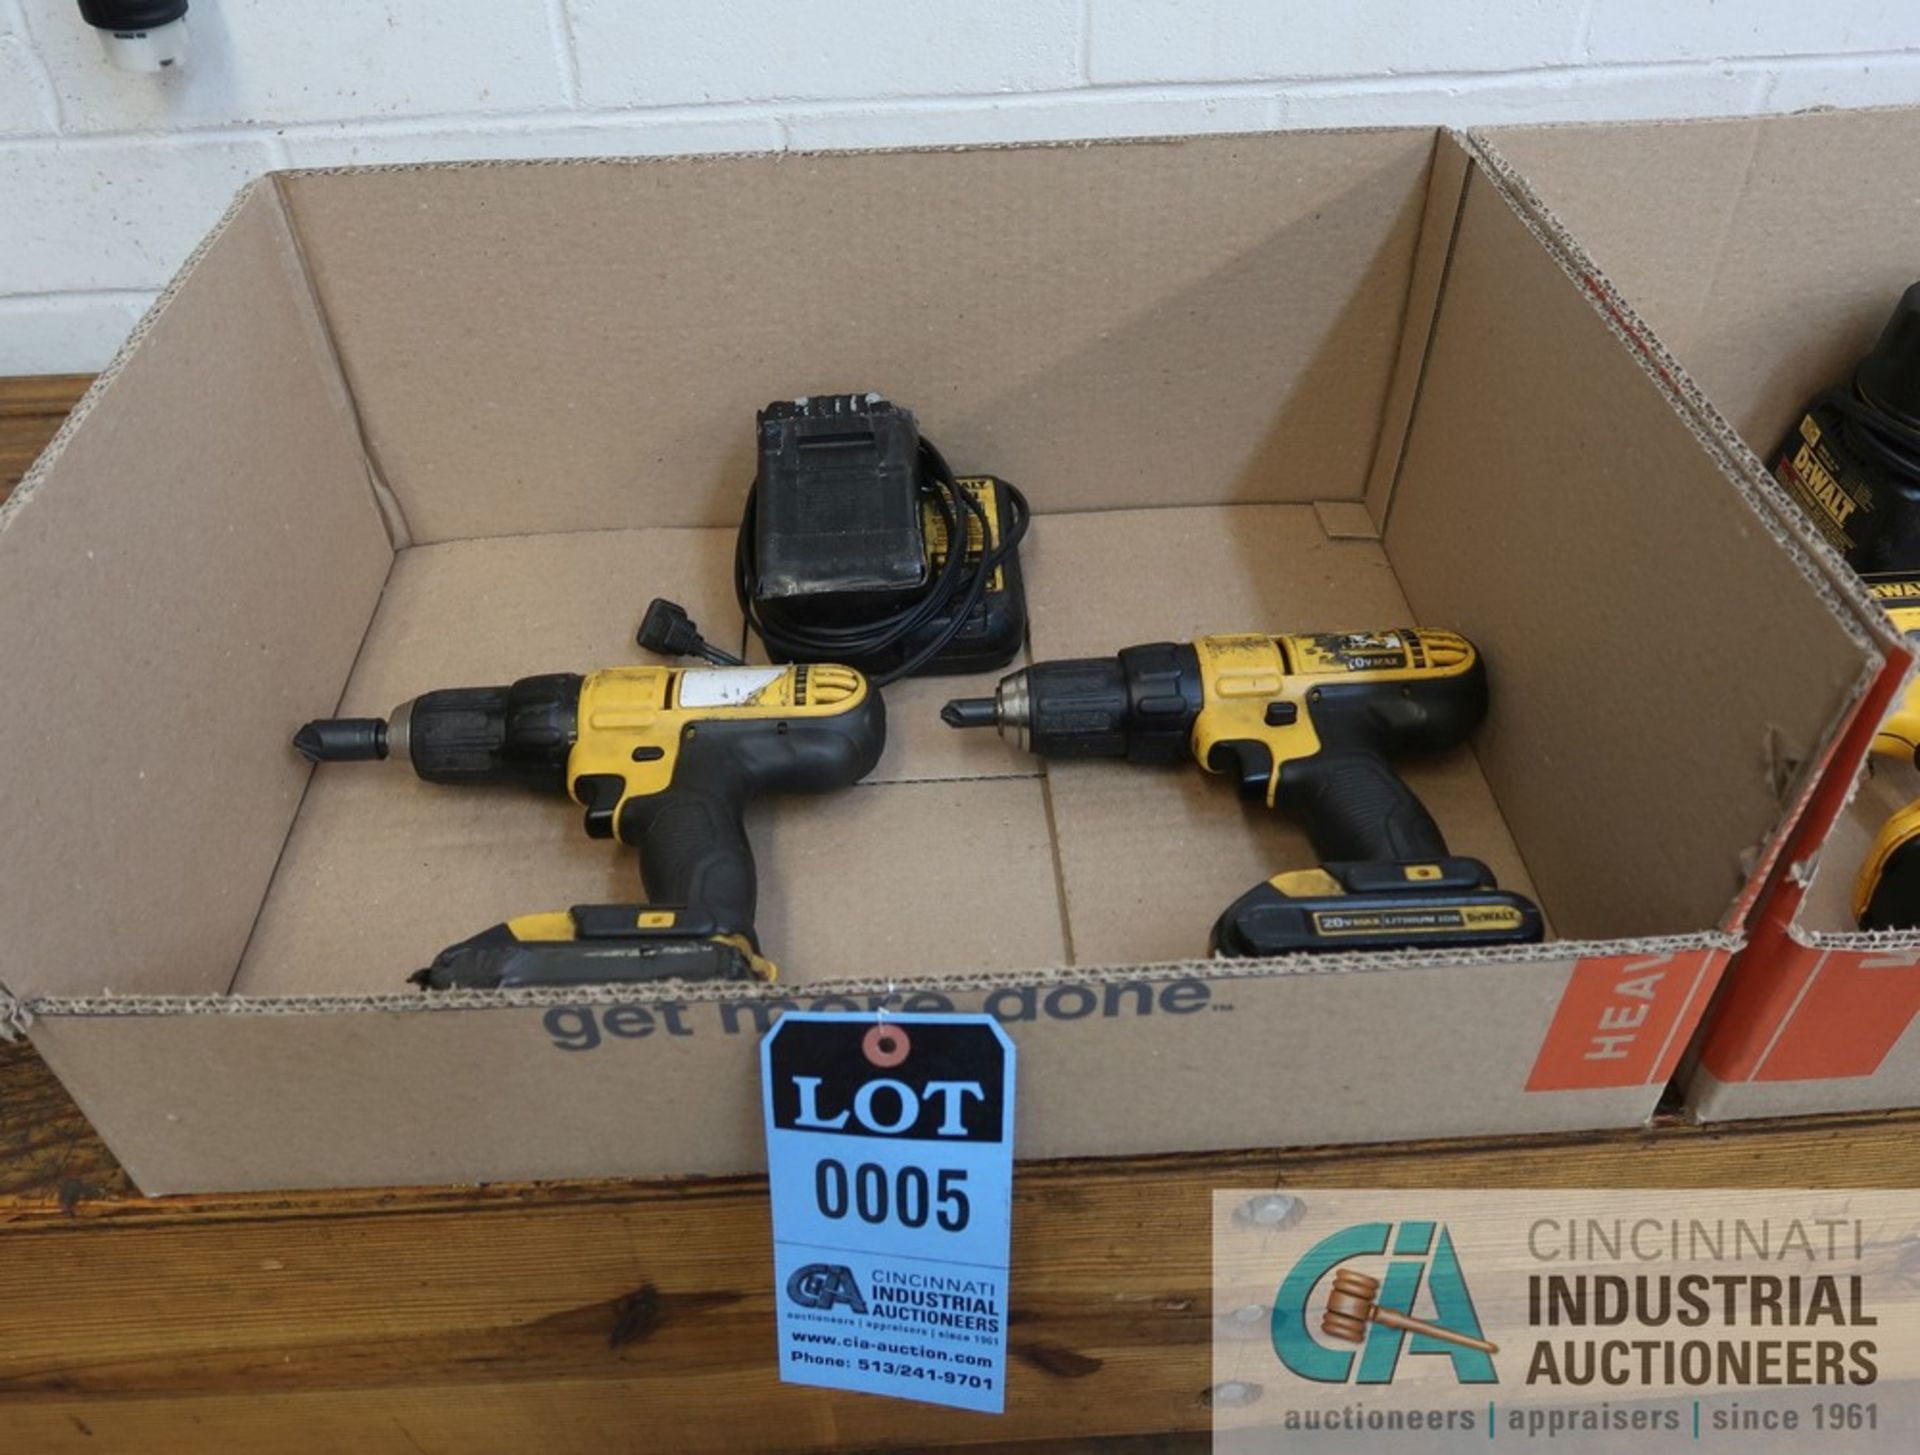 1/2" DEWALT 20 VOLT CORDLESS DRILL / DRIVER WITH CHARGER AND BATTERY